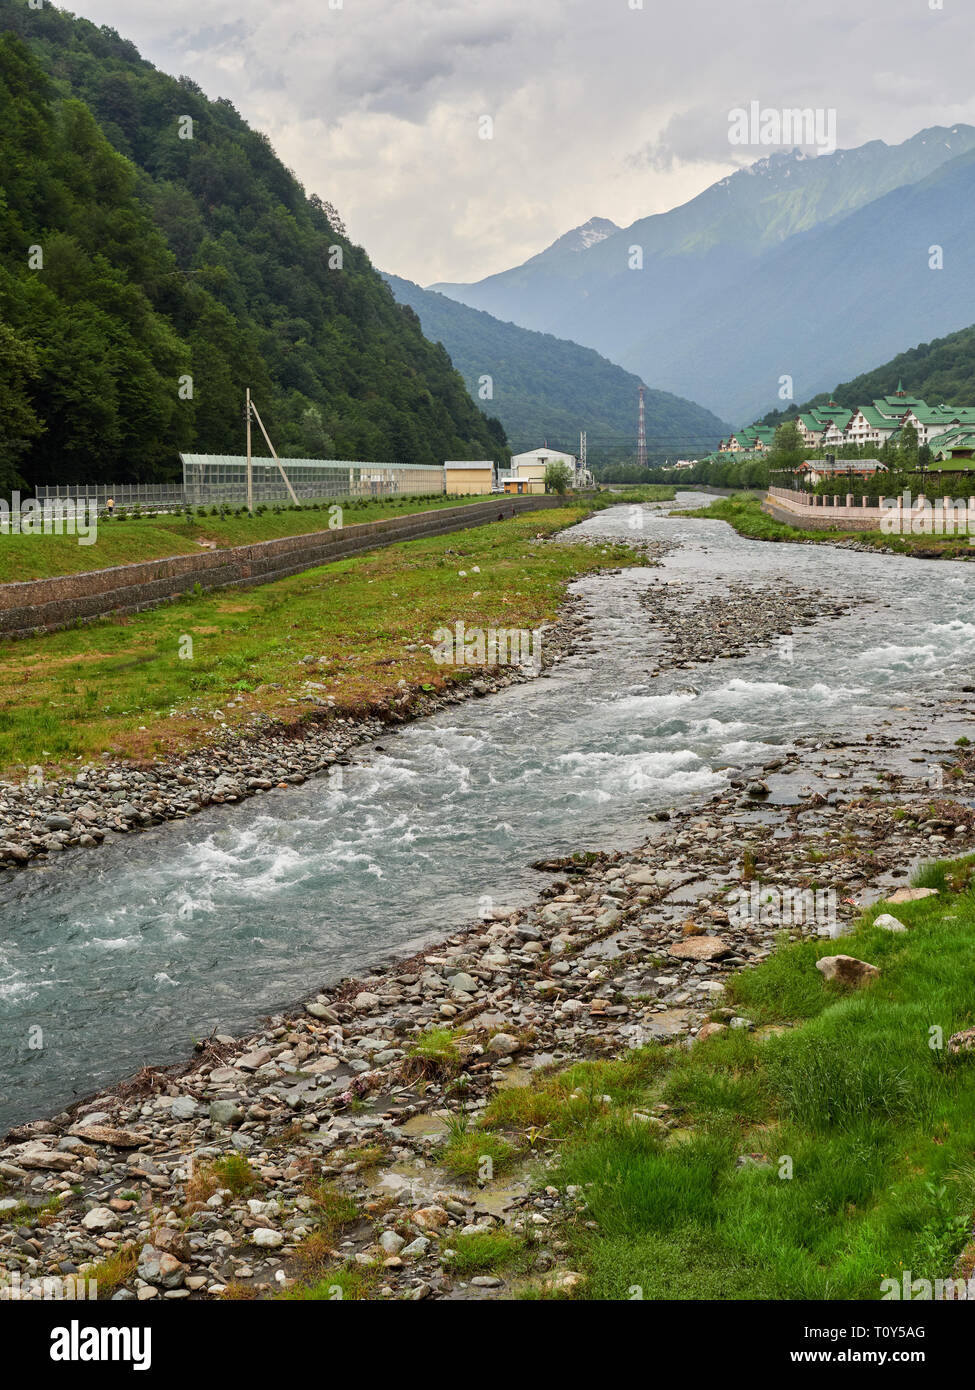 The River Flows Between The Green Mountains In Front Of The Complex Of Hotels High Mountains With Snowy Peaks In The Distance Stock Photo Alamy